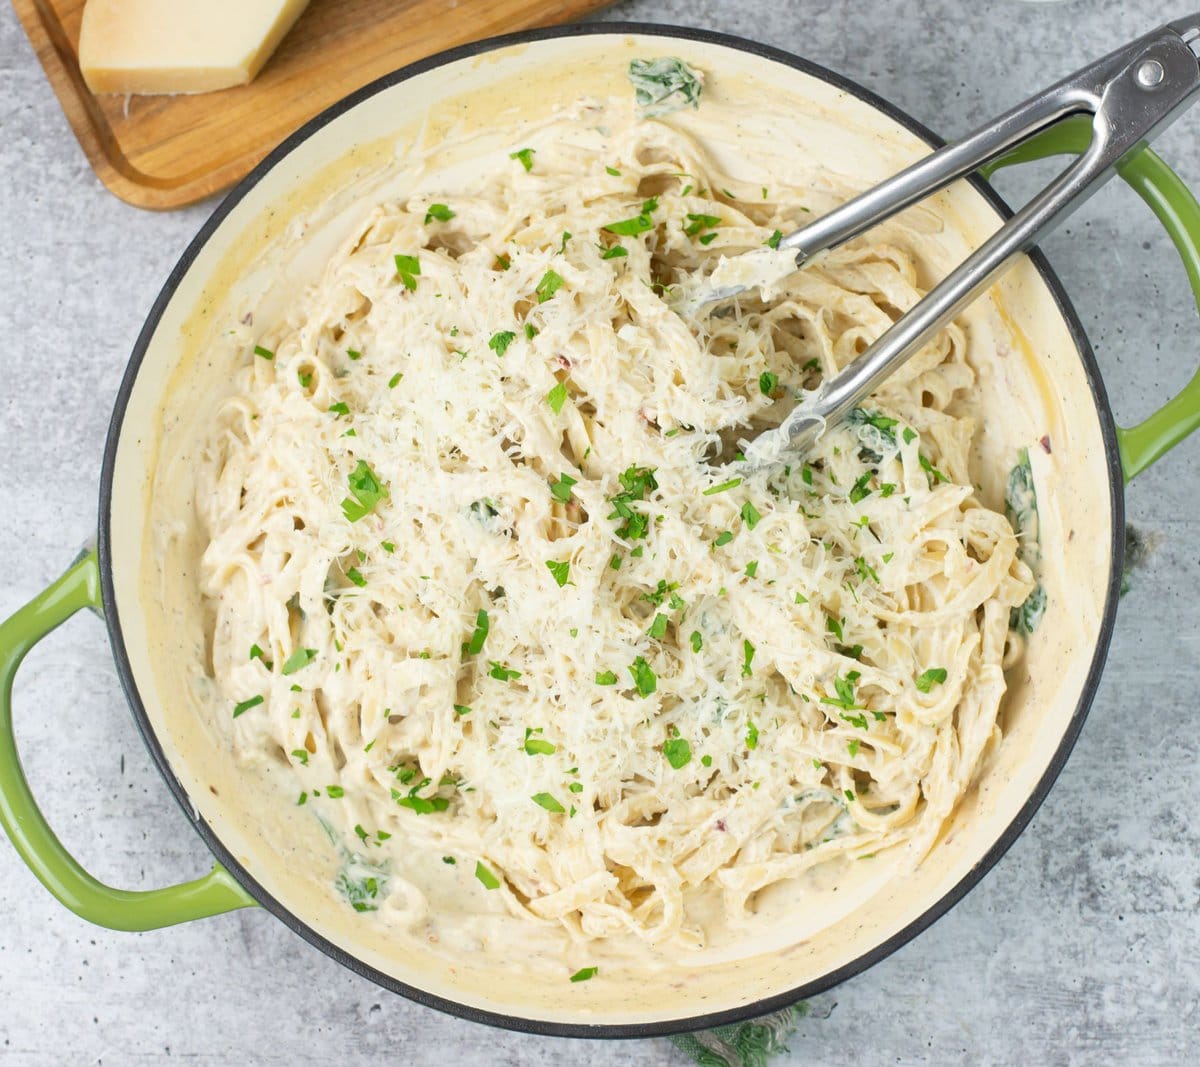 A skillet filled with homemade alfredo sauce made with cream cheese.